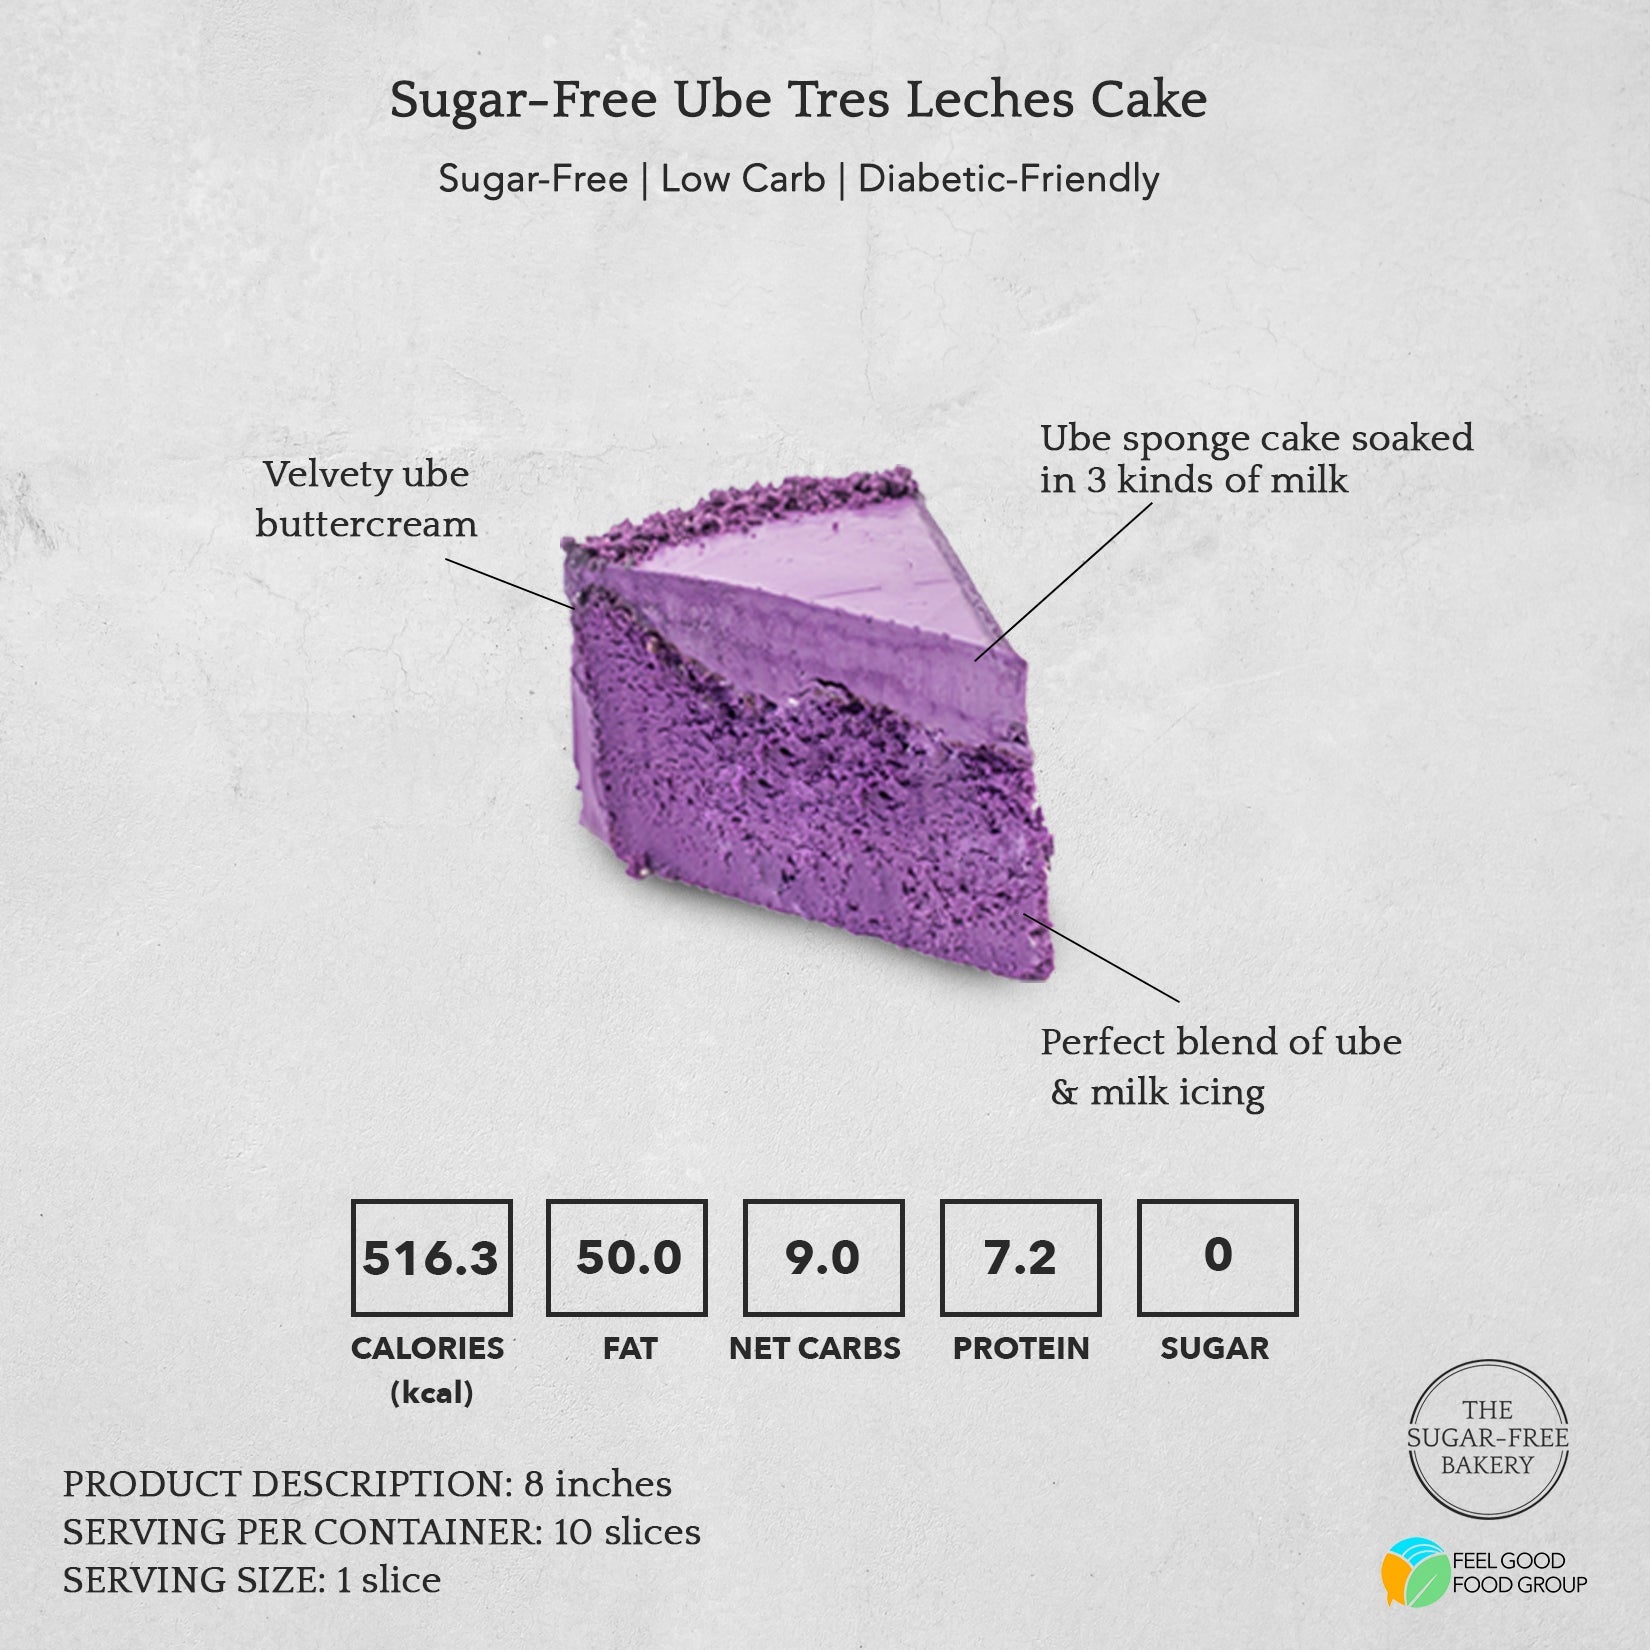 sugar-free ube cake | The Sugar-Free Bakery | Sugar-Free Gifts | Sugar Free Gift | Sugar-Free Cake | Sugar Free Cake | Holiday Gifting | Christmas Gifts | Corporate Gifting | Dessert | Spread | Bread | Very Peri